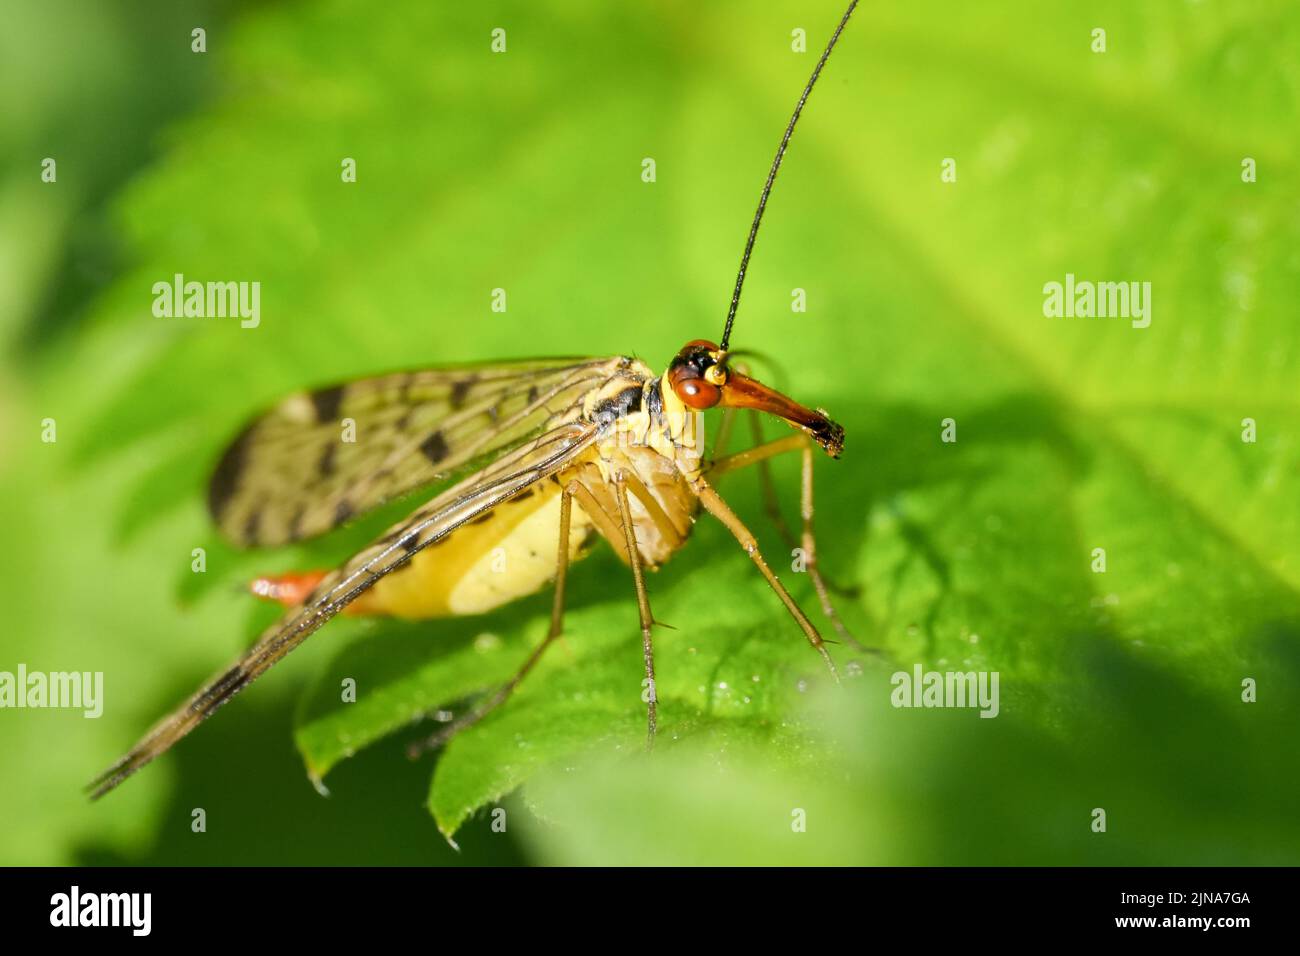 A closeup shot of a common scorpionfly perched on a green leaf on a sunny day Stock Photo